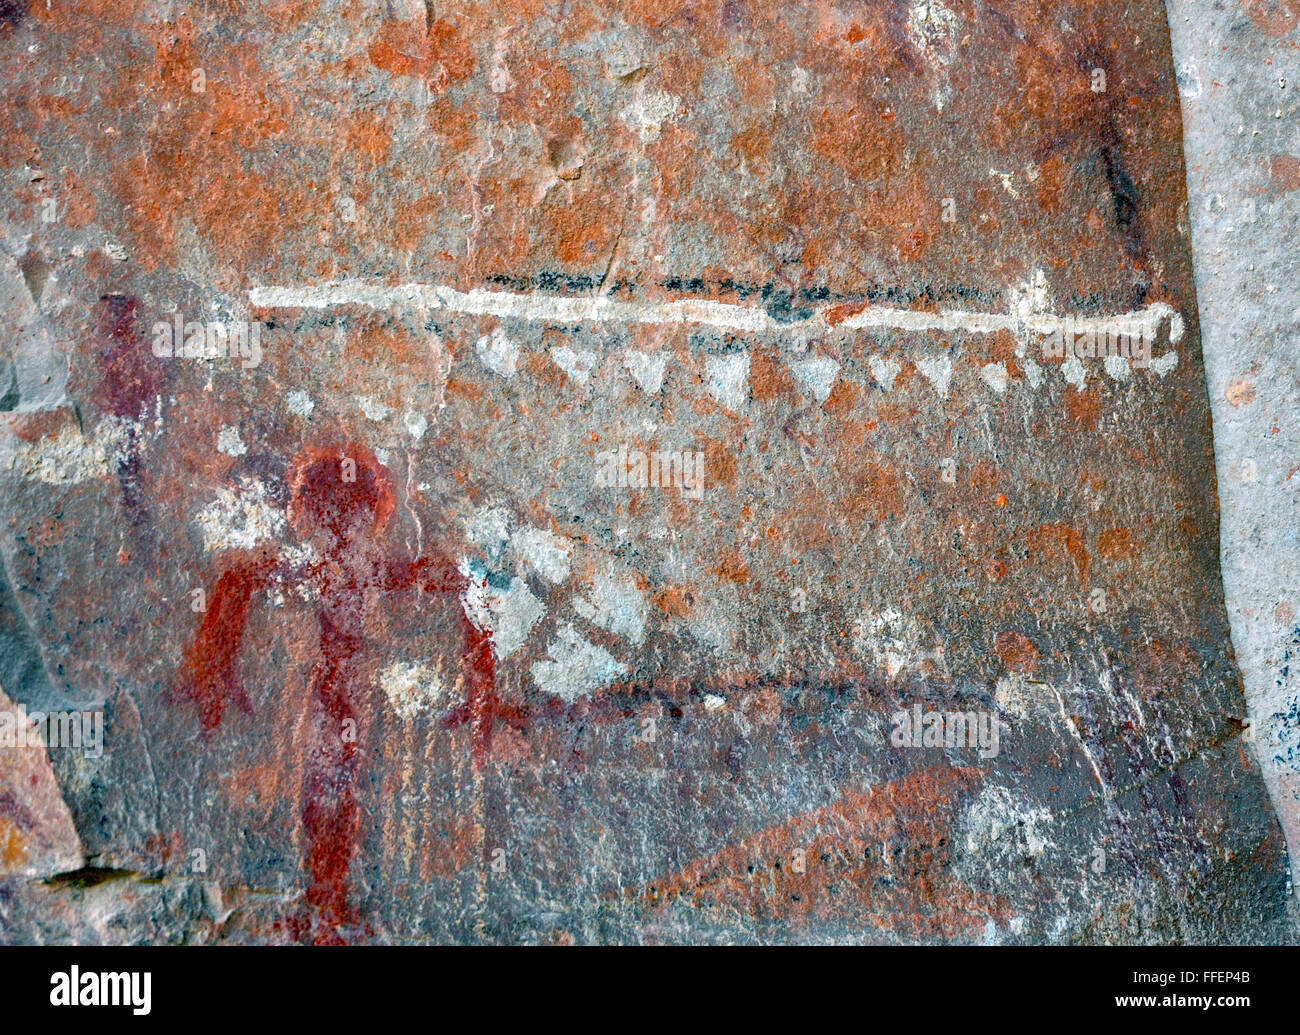 Rock art Pictograph image drawn or painted on rock face, suggest hunting scenses, religious ceremony. Sinagua. Hopi tribe. Stock Photo